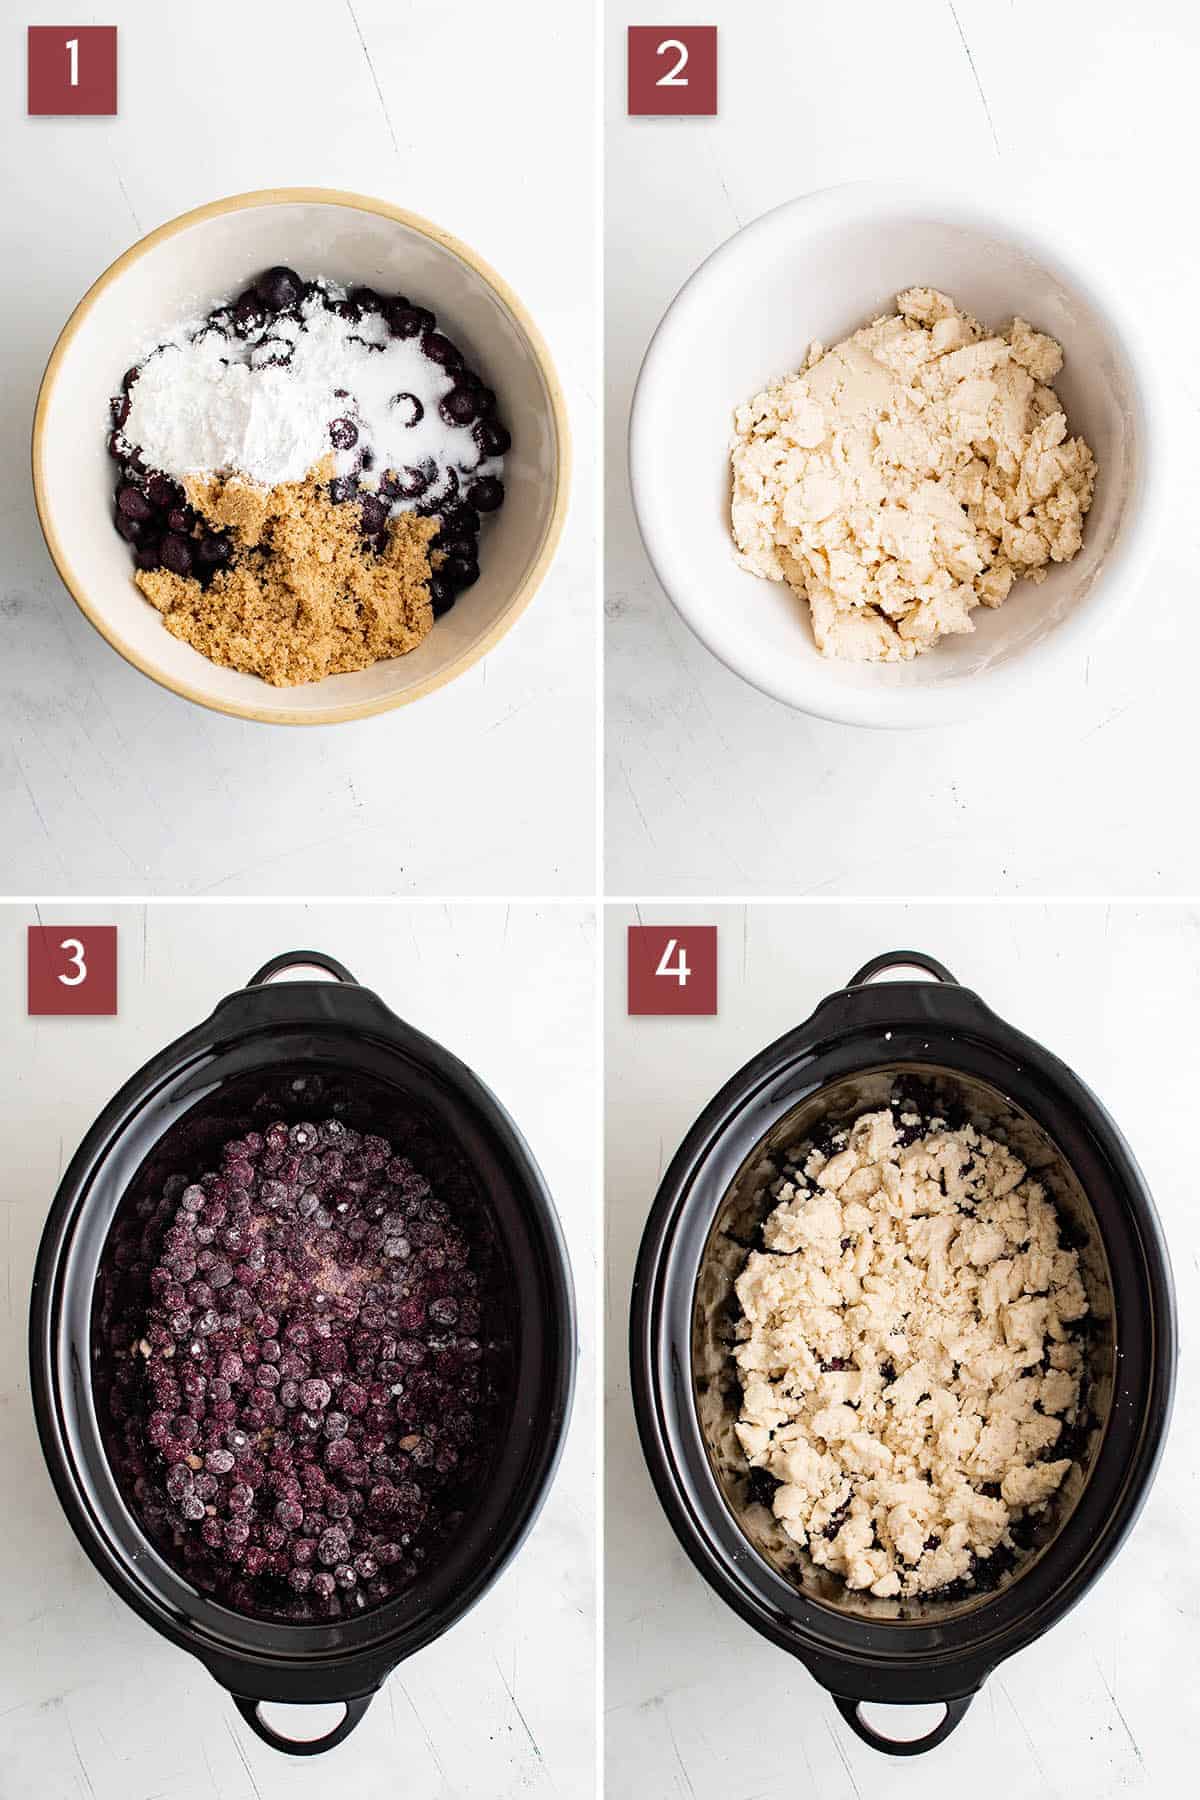 Four panel collage showing different parts of the blueberry cobbler making process